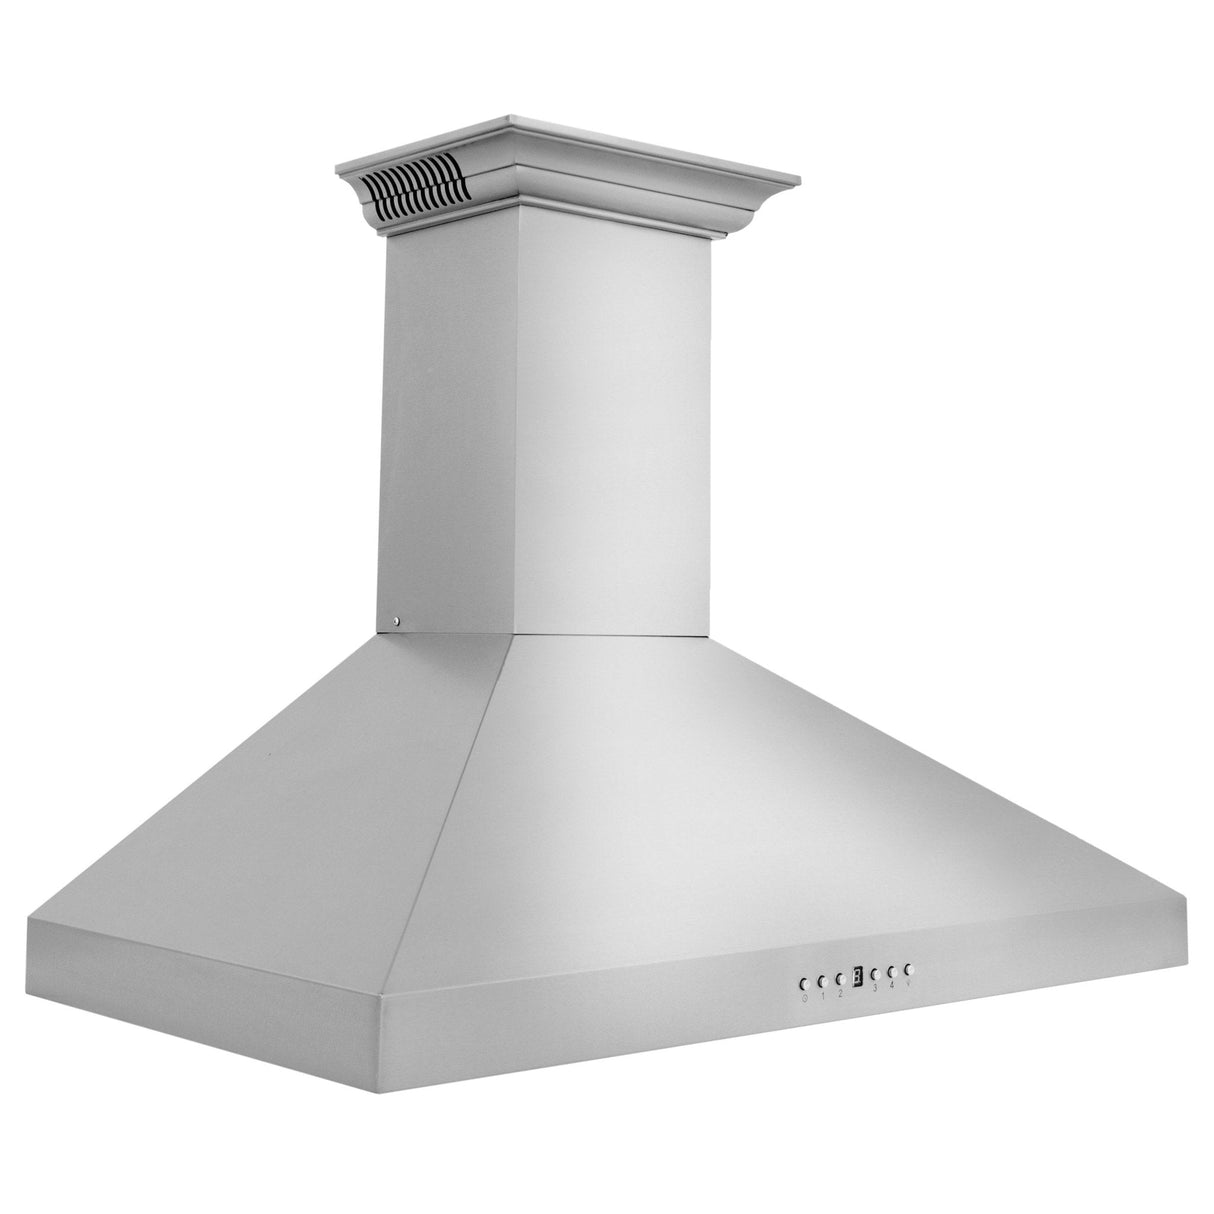 ZLINE Ducted Vent Wall Mount Range Hood in Stainless Steel with Built-in ZLINE CrownSound Bluetooth Speakers (KL3CRN-BT)